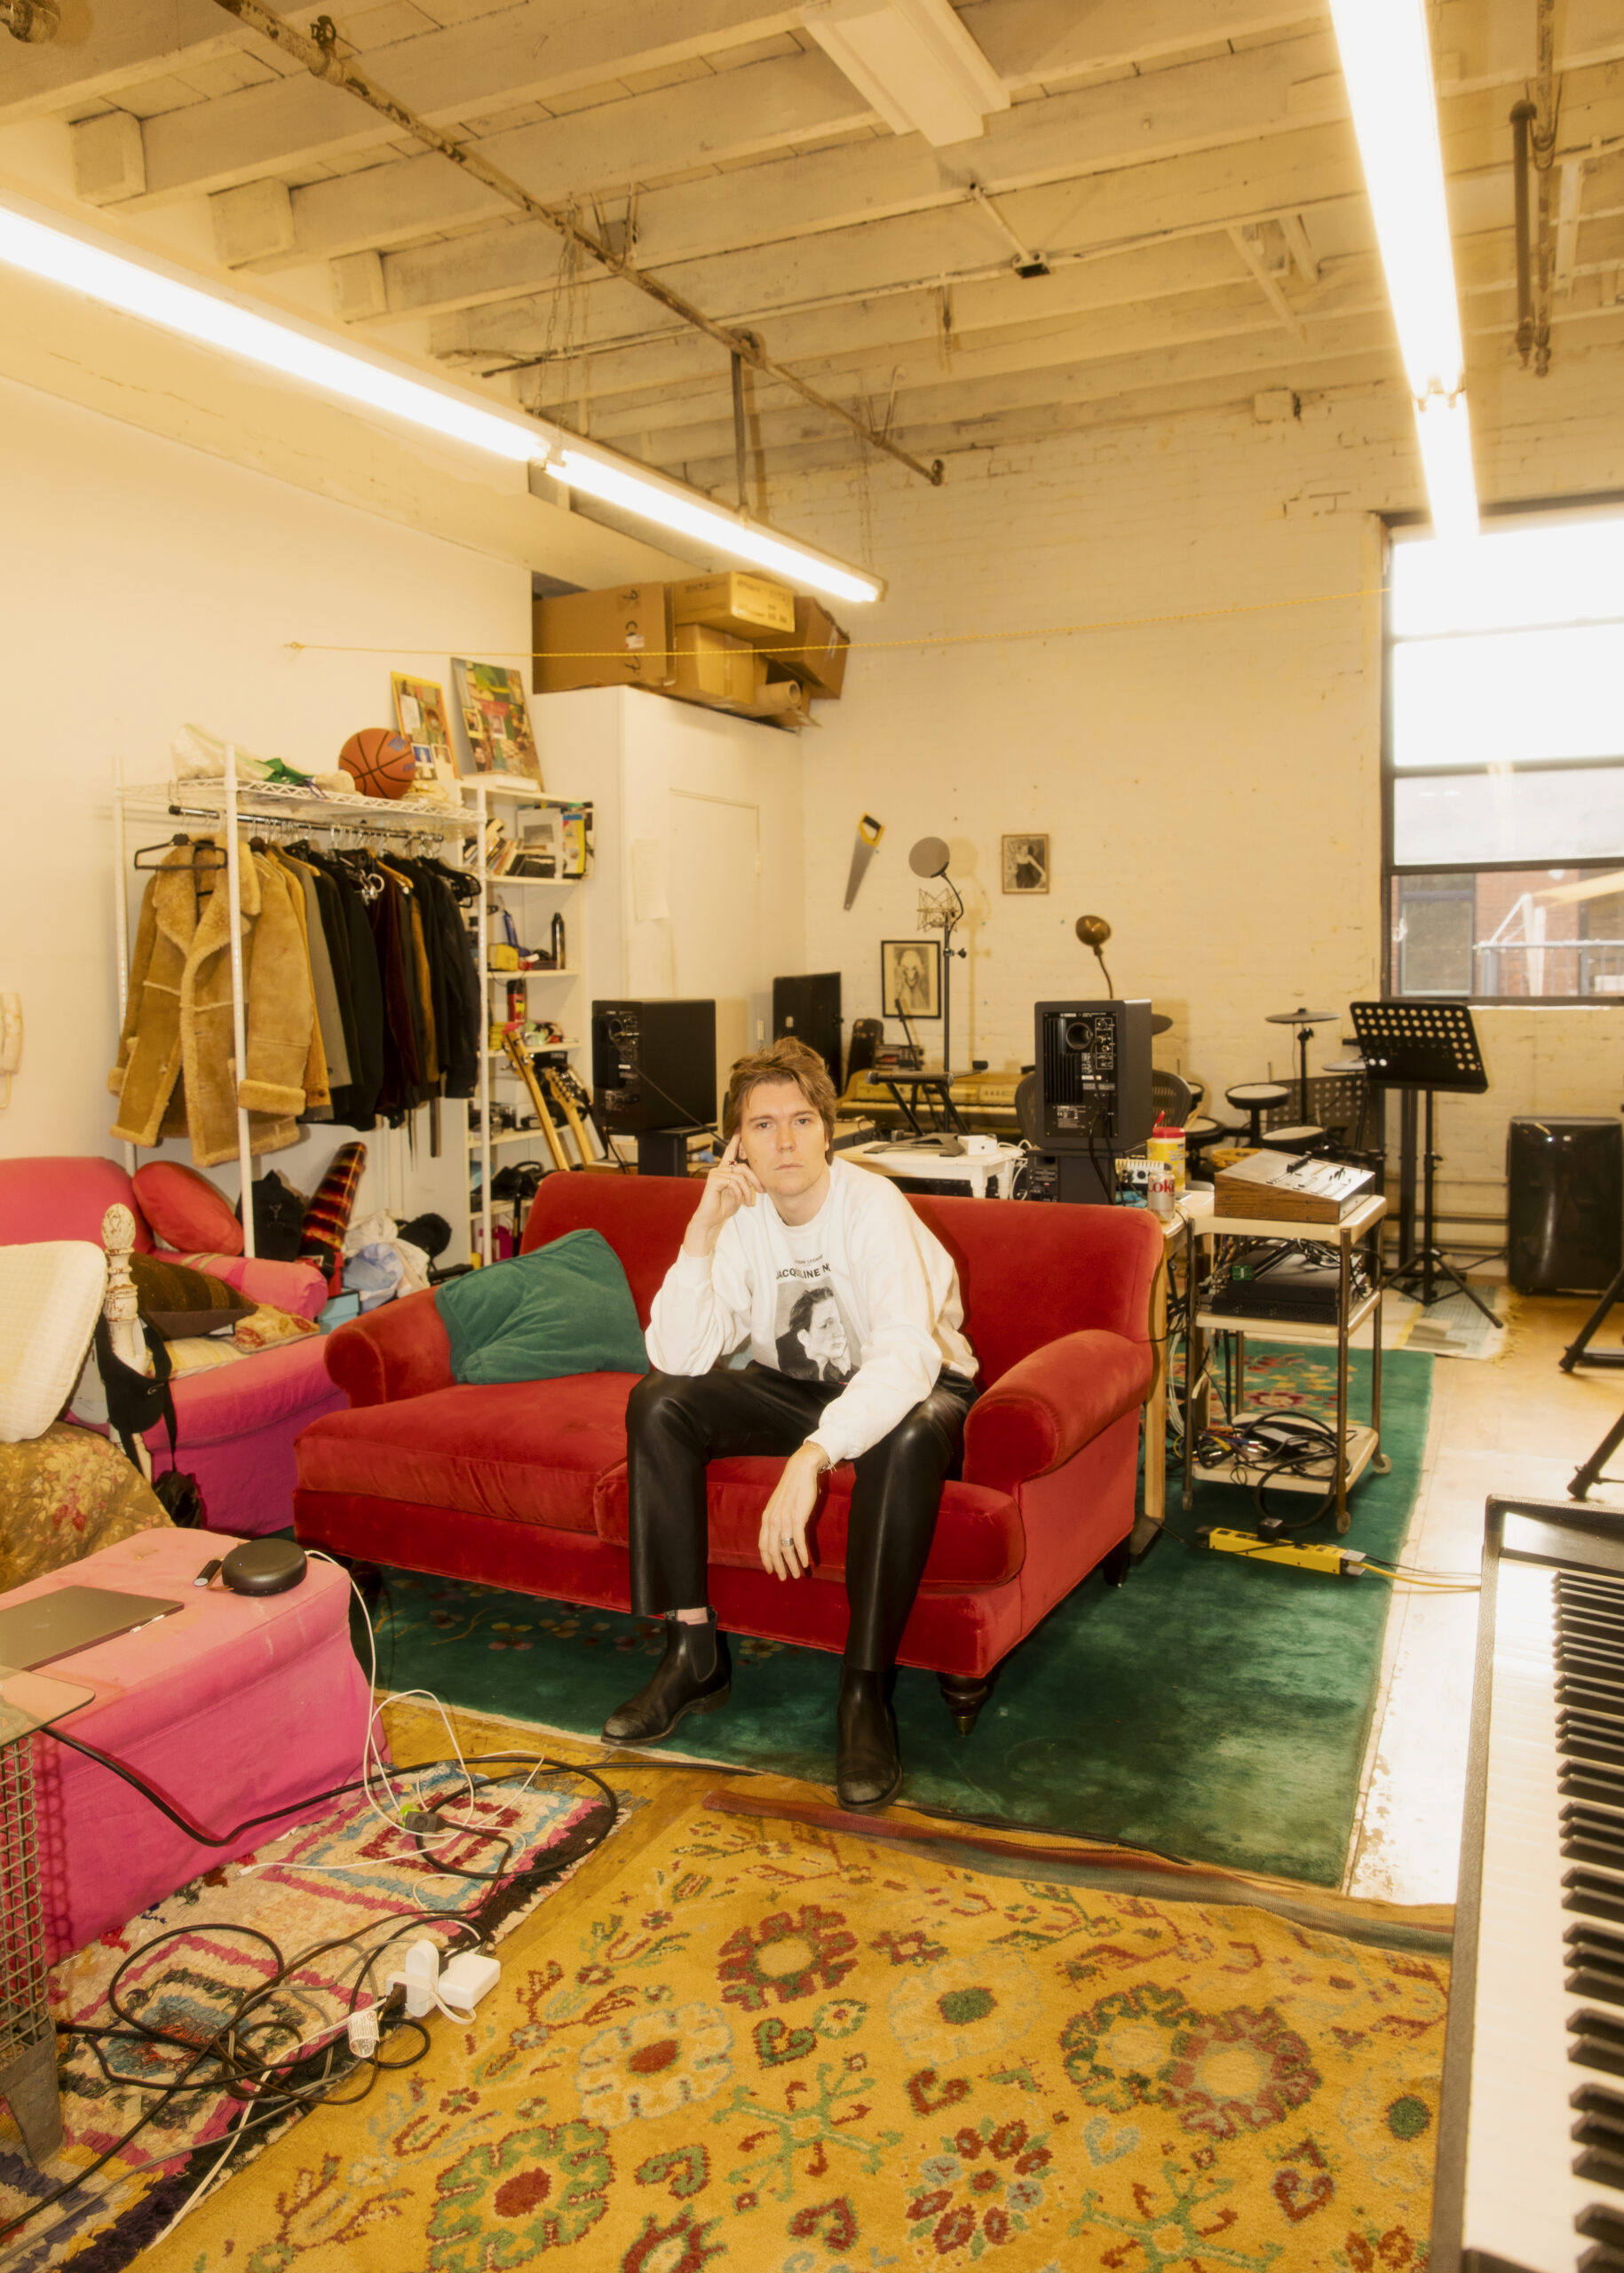 Alex Cameron sat on a sofa in the middle of his Brooklyn warehouse studio